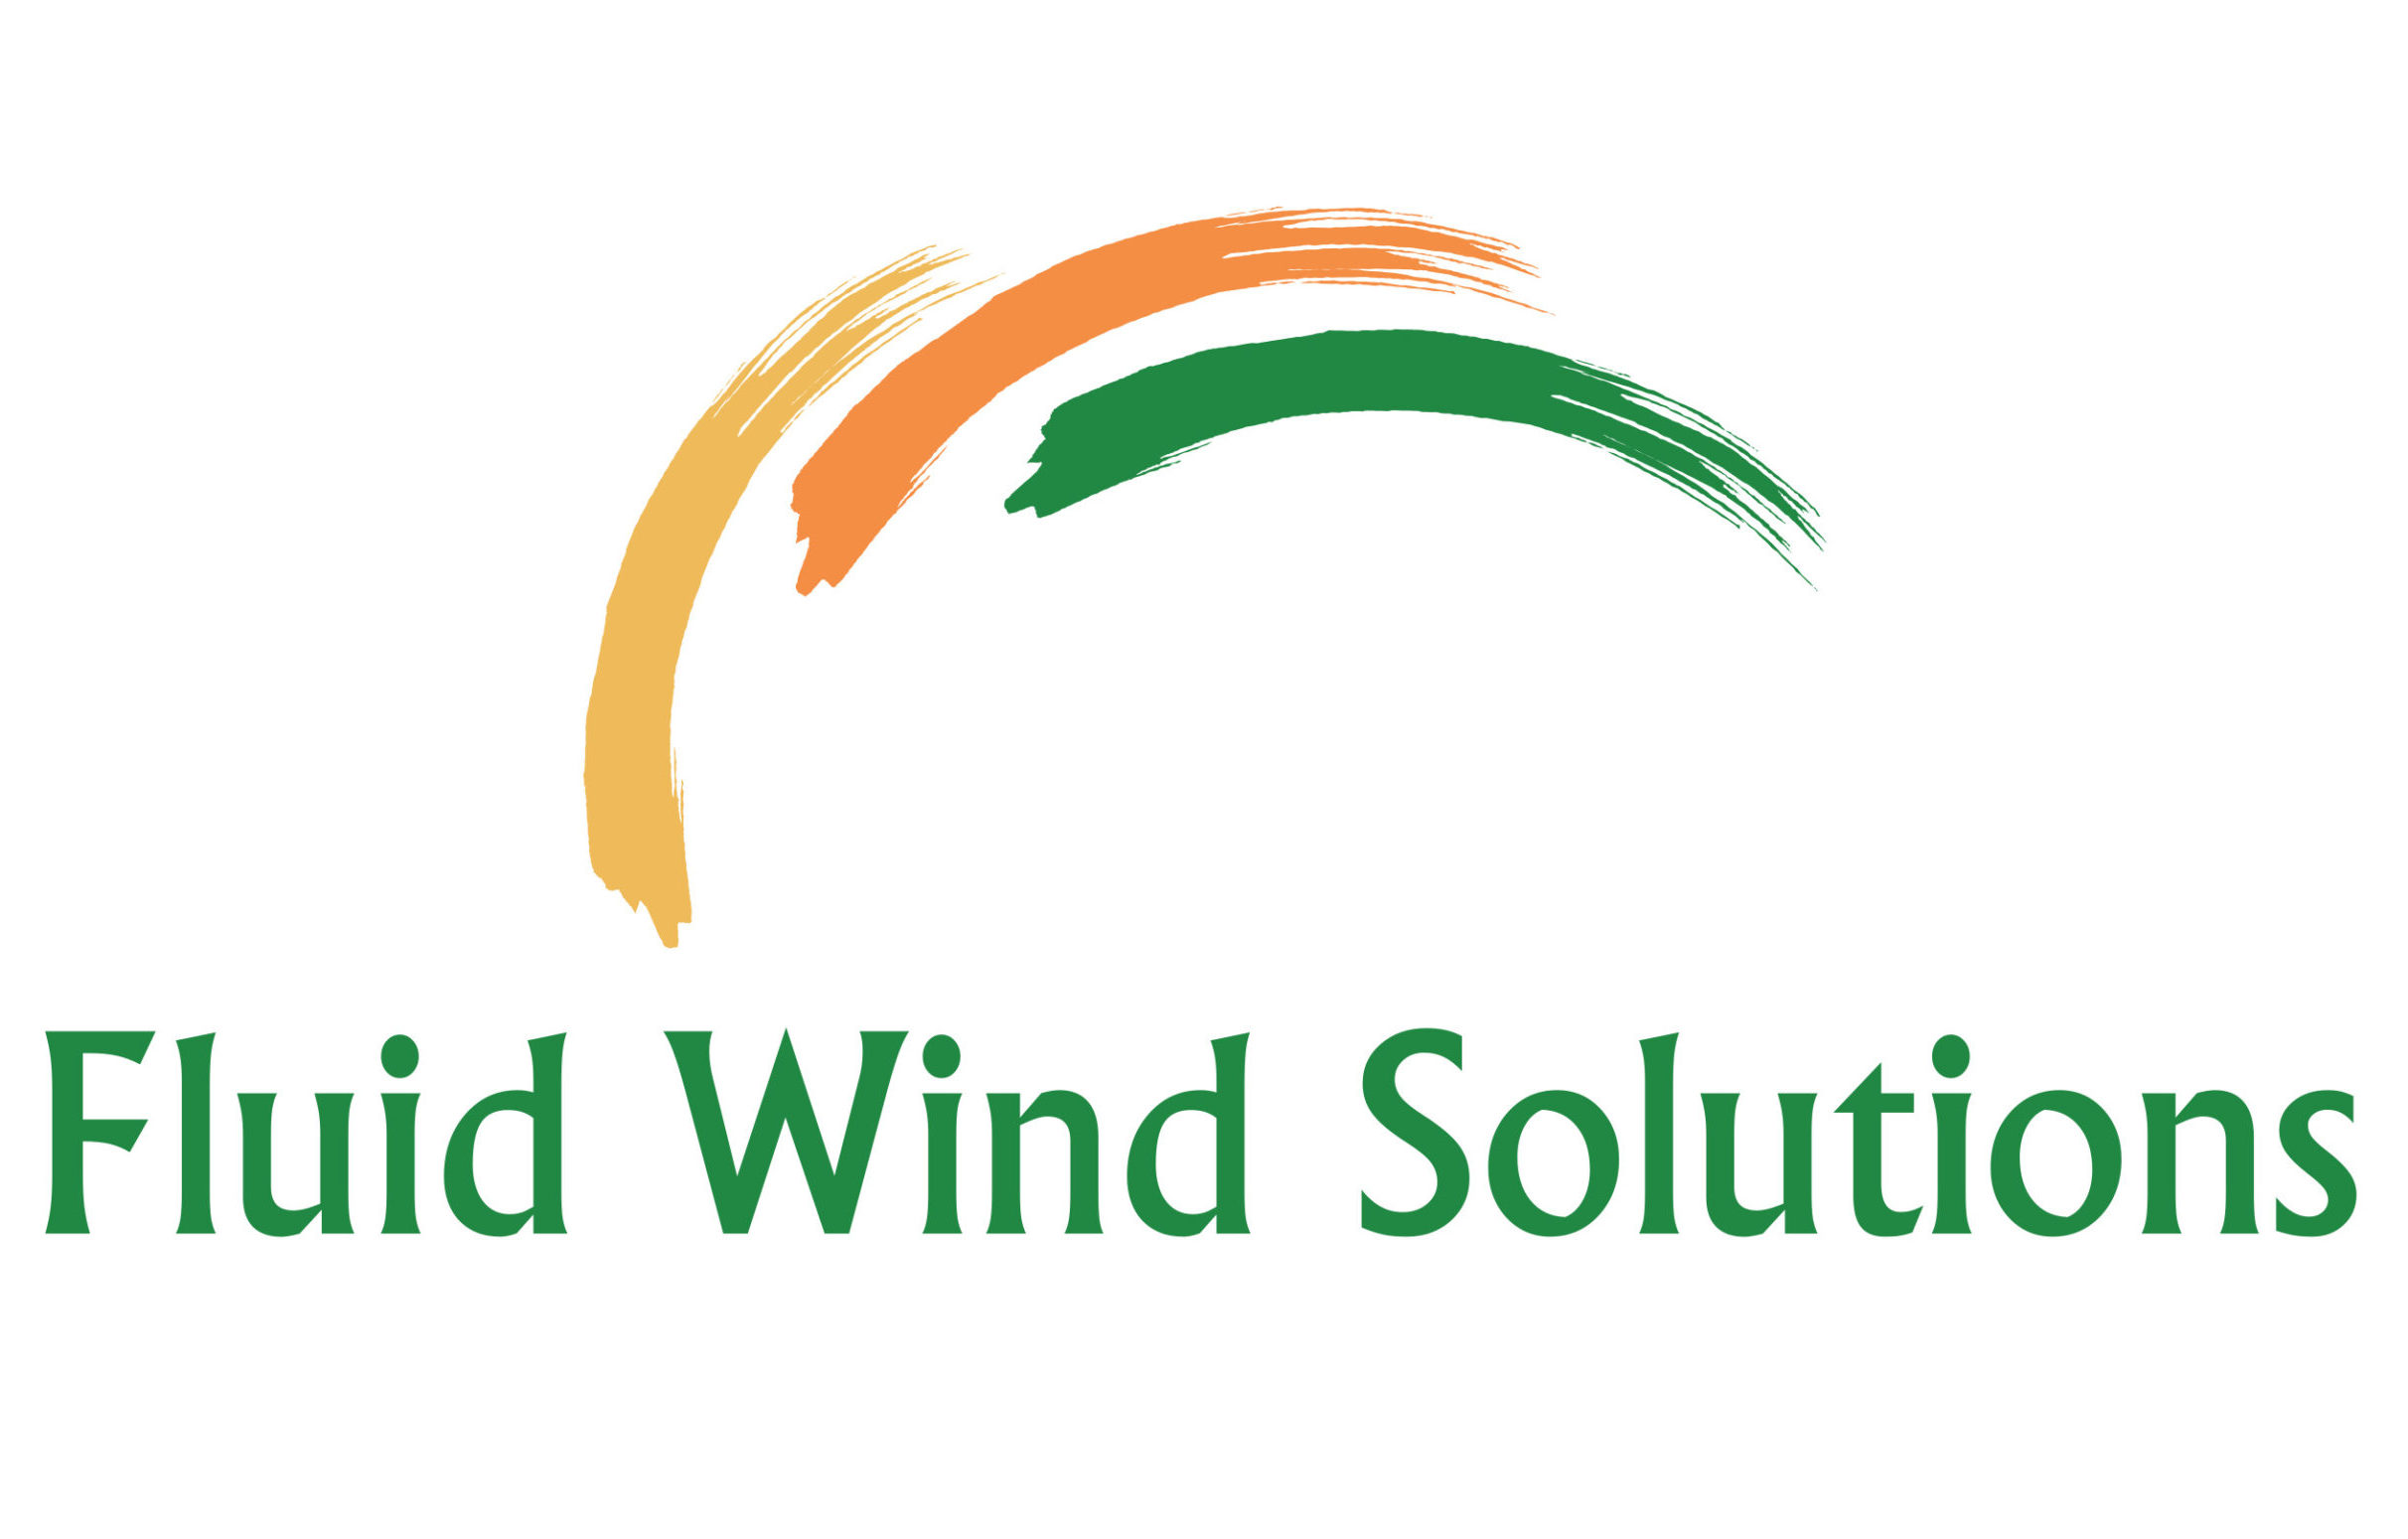 Fluid wind solutions